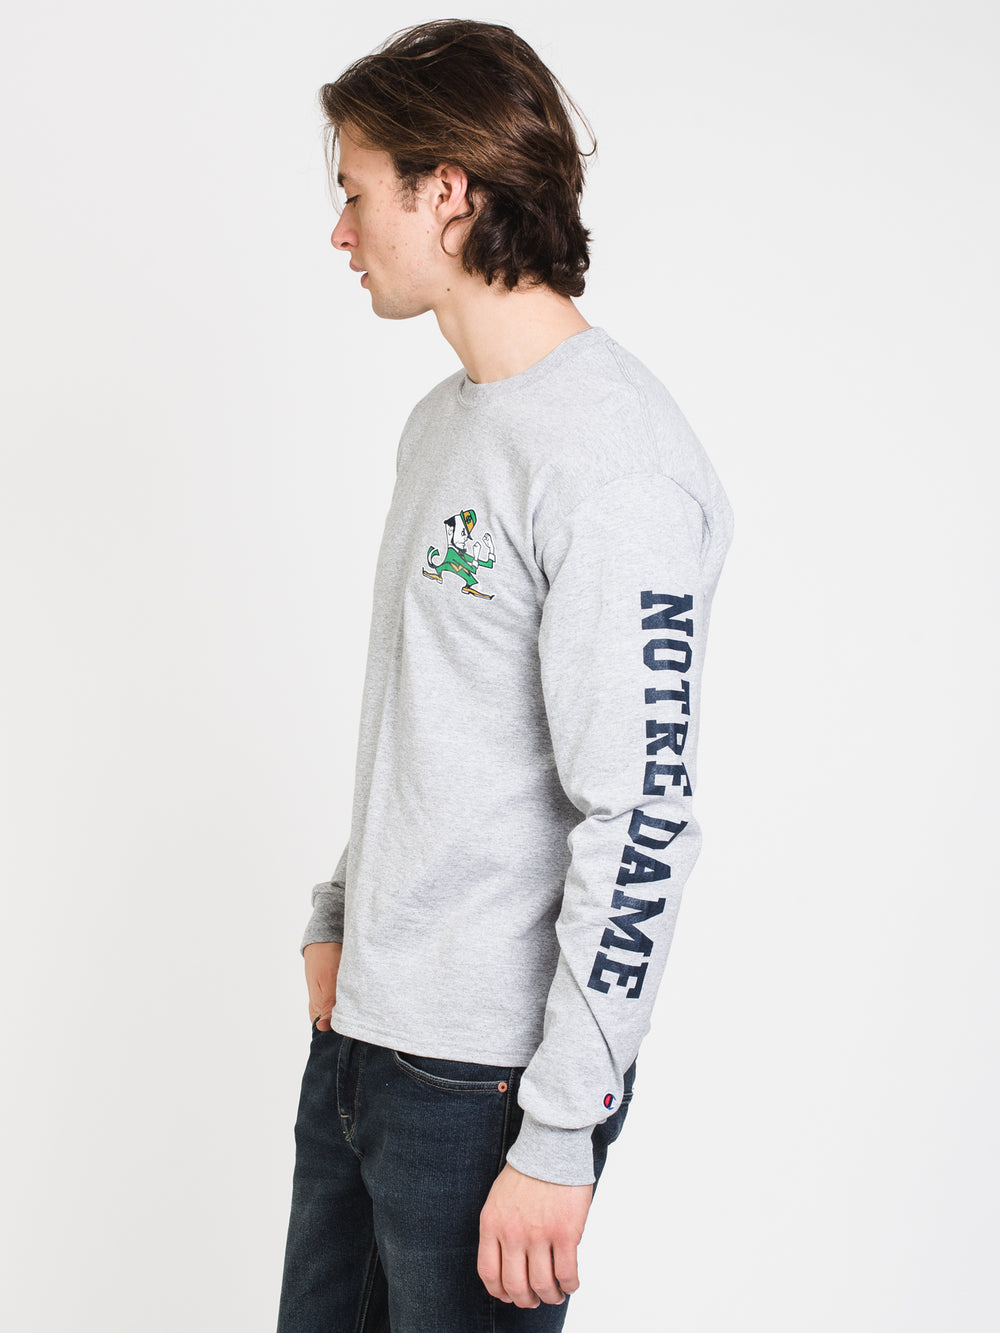 CHAMPION NOTRE DAME LONG SLEEVE TEE  - CLEARANCE